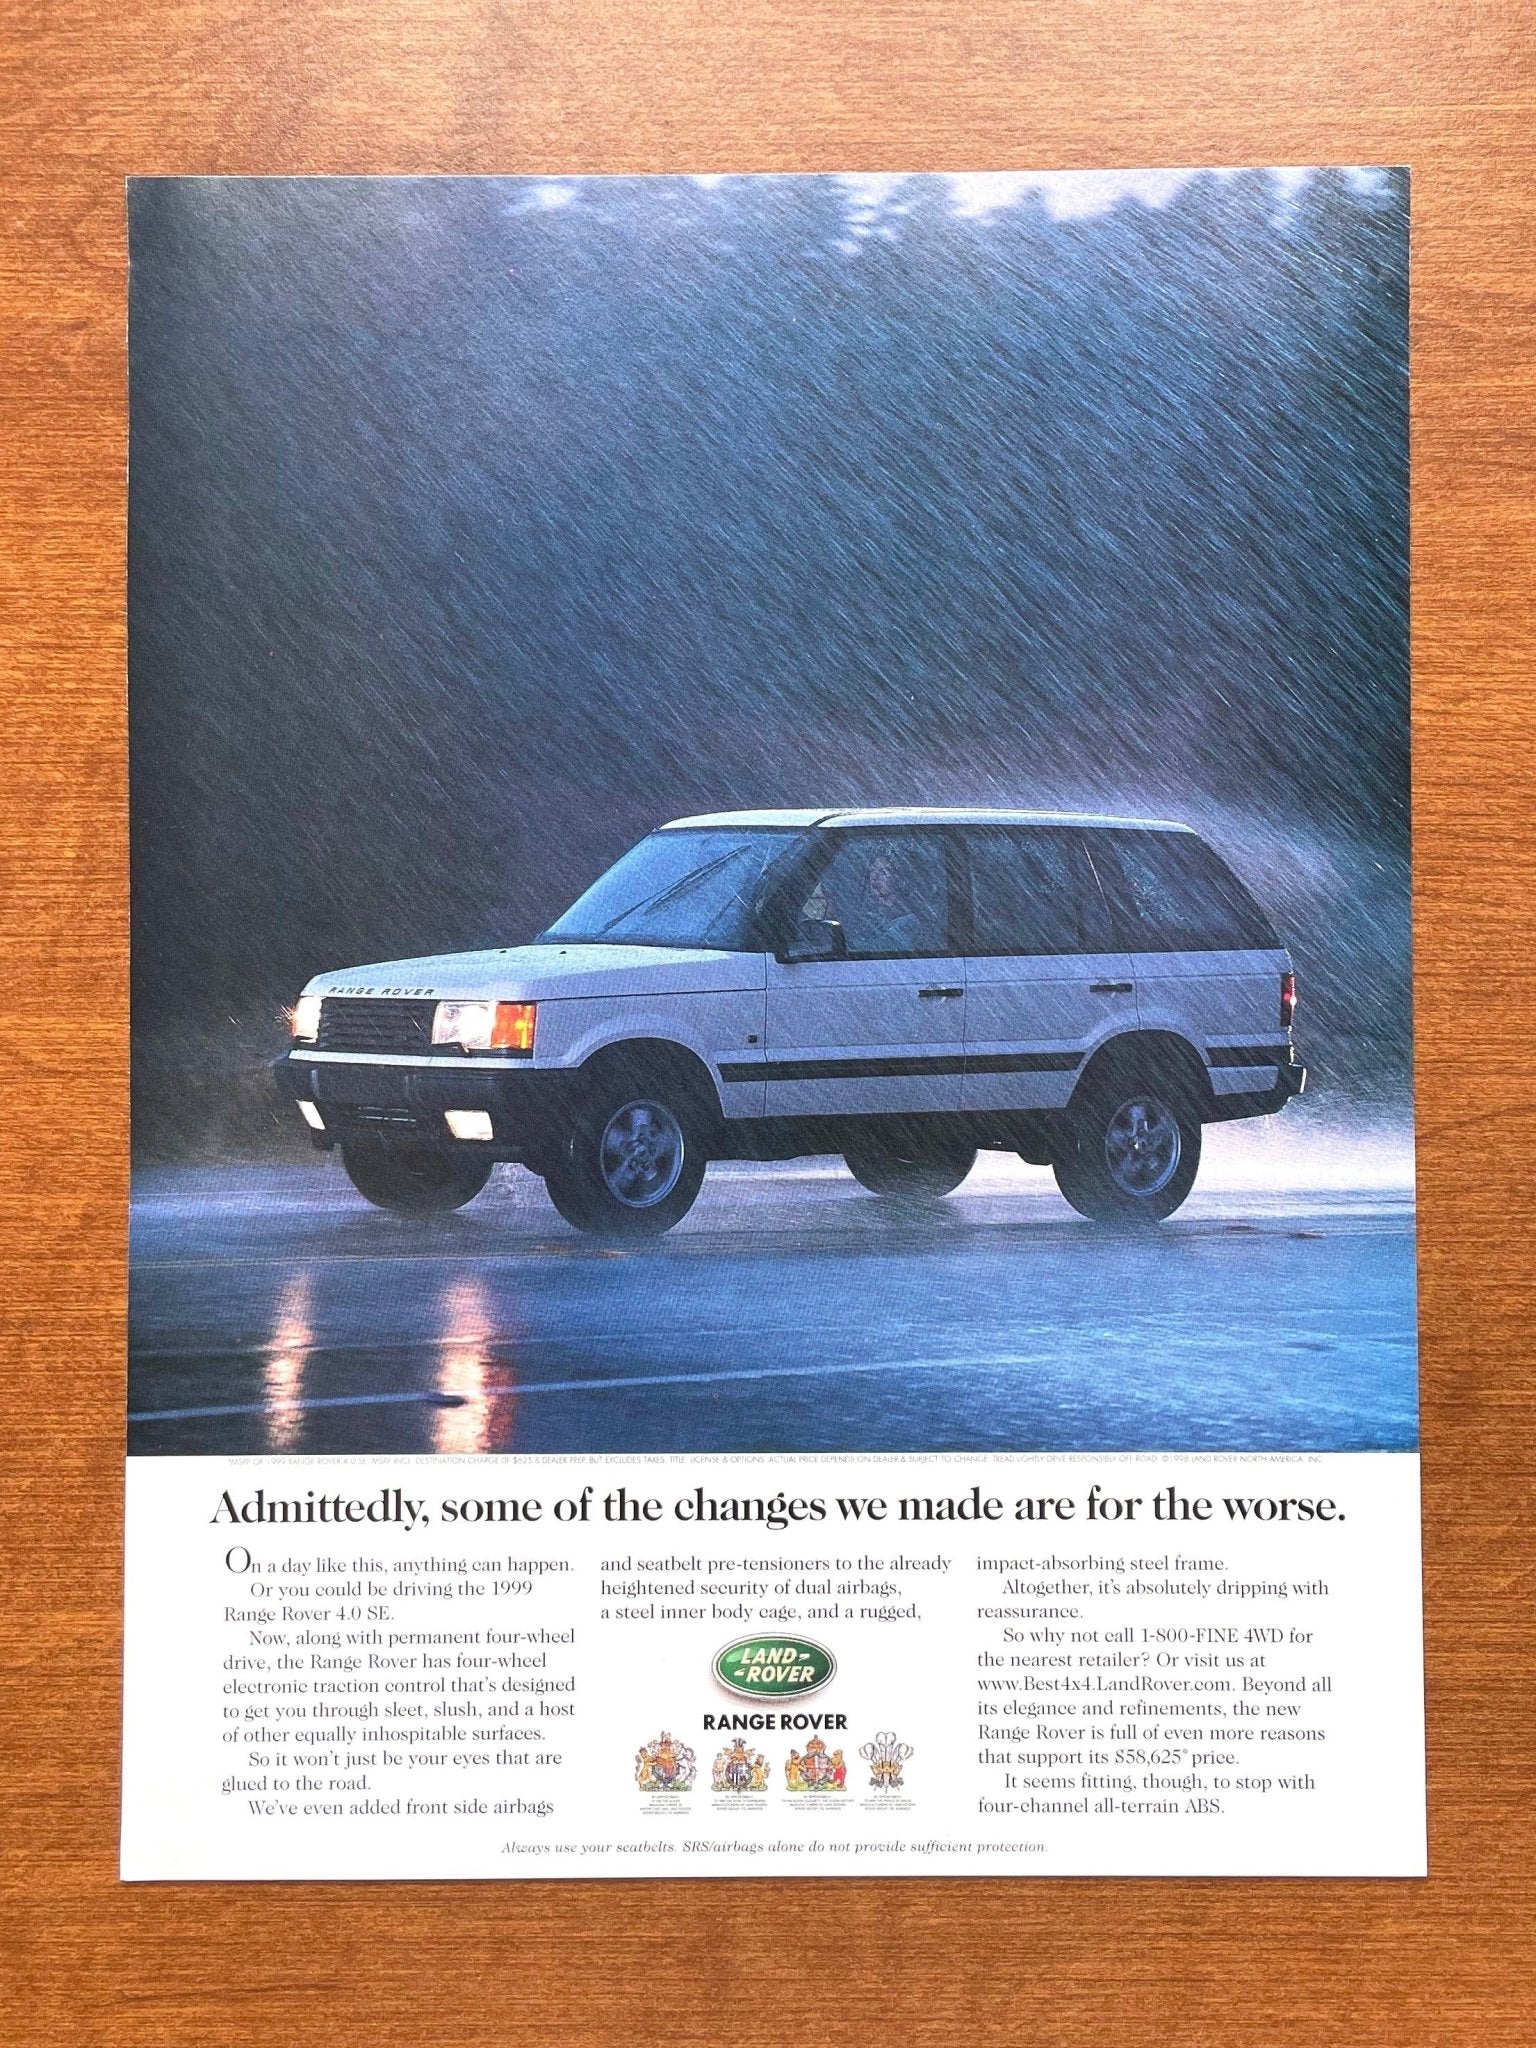 1999 Range Rover 4.0 SE "changes we made for the worse." Advertisement